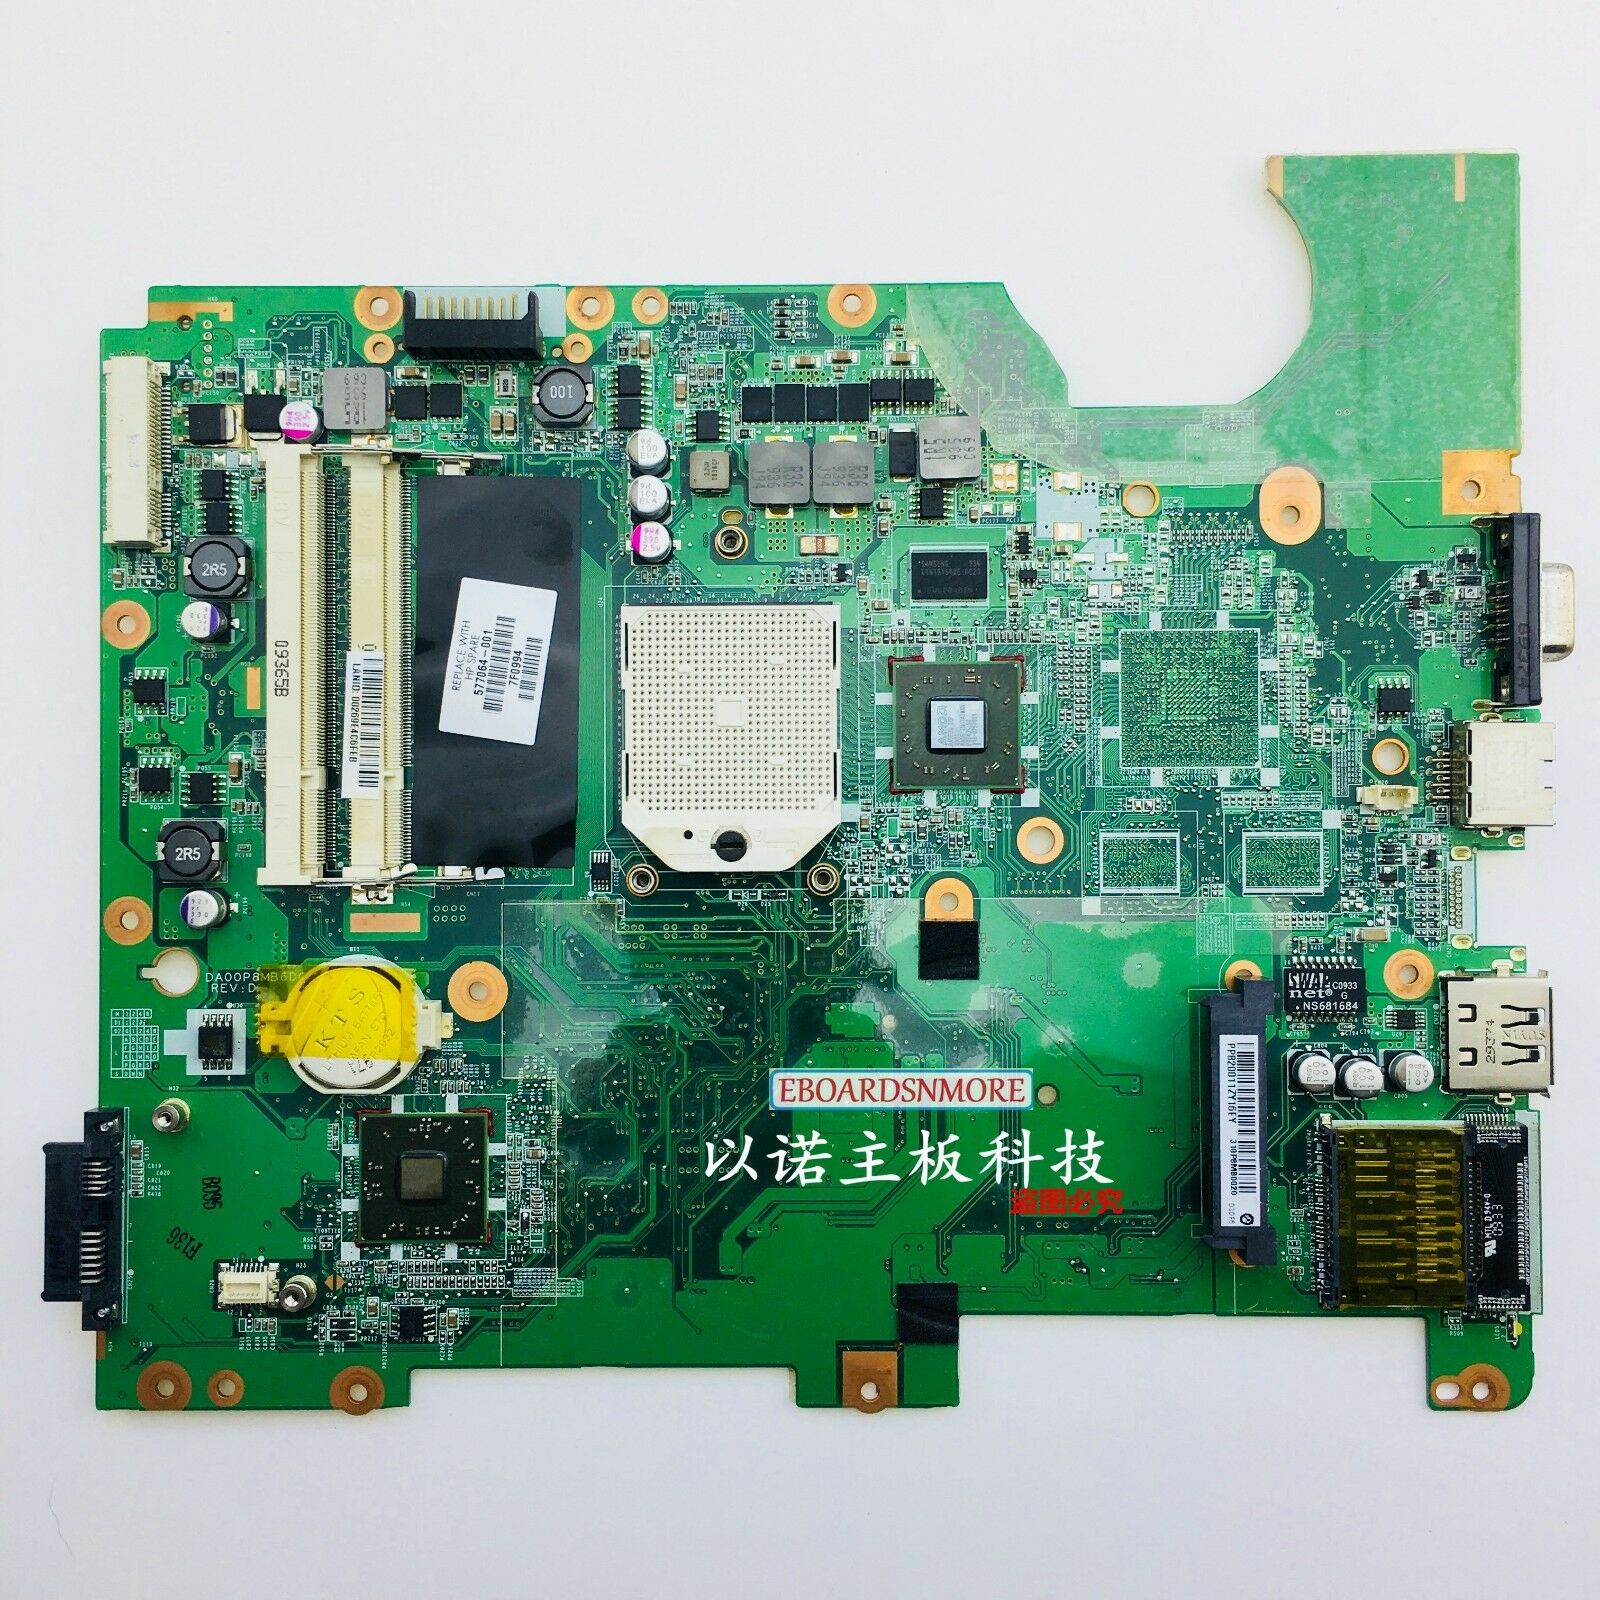 577064-001 for HP Compaq CQ61 G61 Laptop AMD Motherboard,Grade A Compatible CPU Brand: INTEL Number of Mem